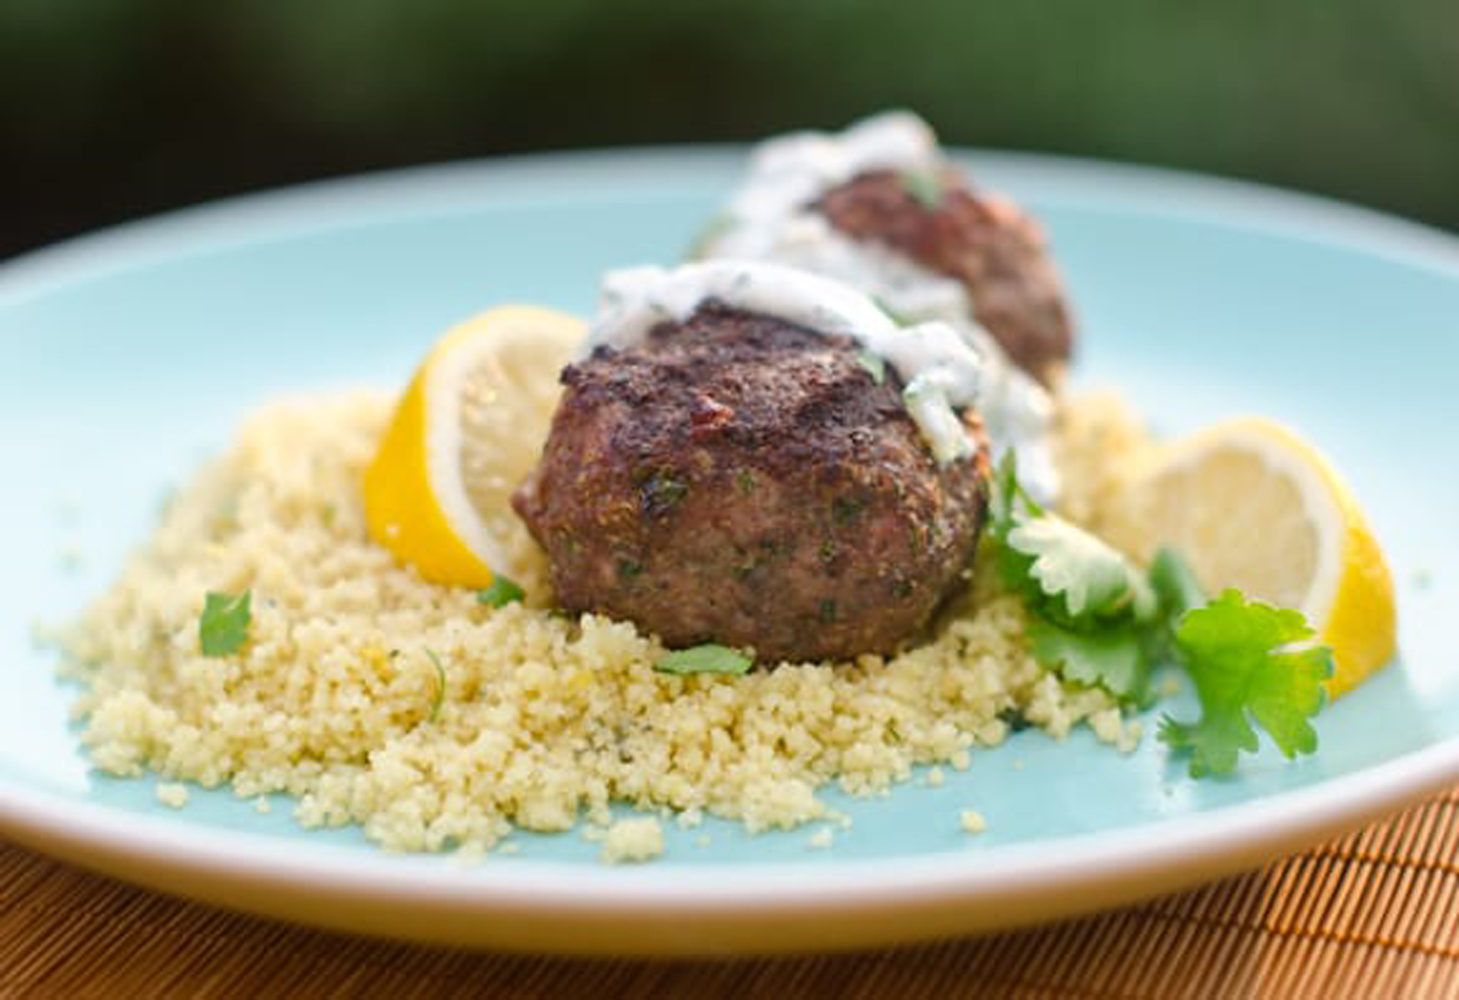 Spice-Rubbed Lamb Skewers With Herb-Yogurt Sauce Recipe - NYT Cooking